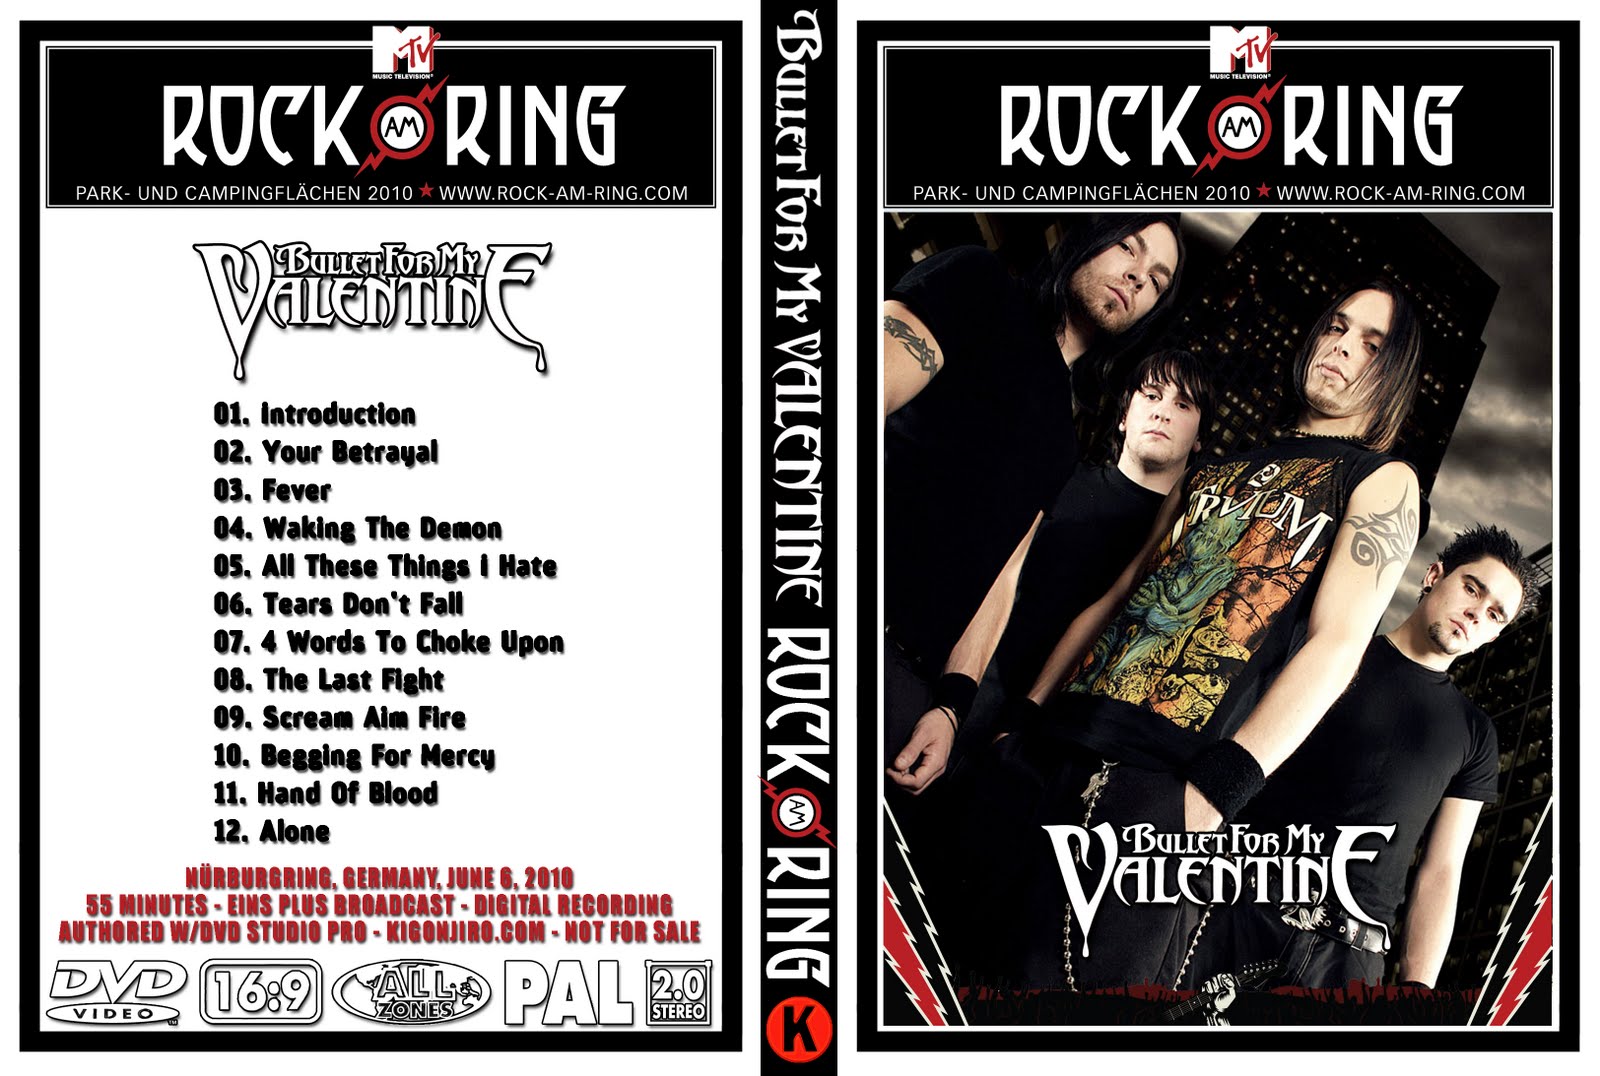 Rock am Ring 2010. Группа Bullet for my Valentine. Him Rock am Ring 2005. Bullet for my Valentine DVD. Song rock me